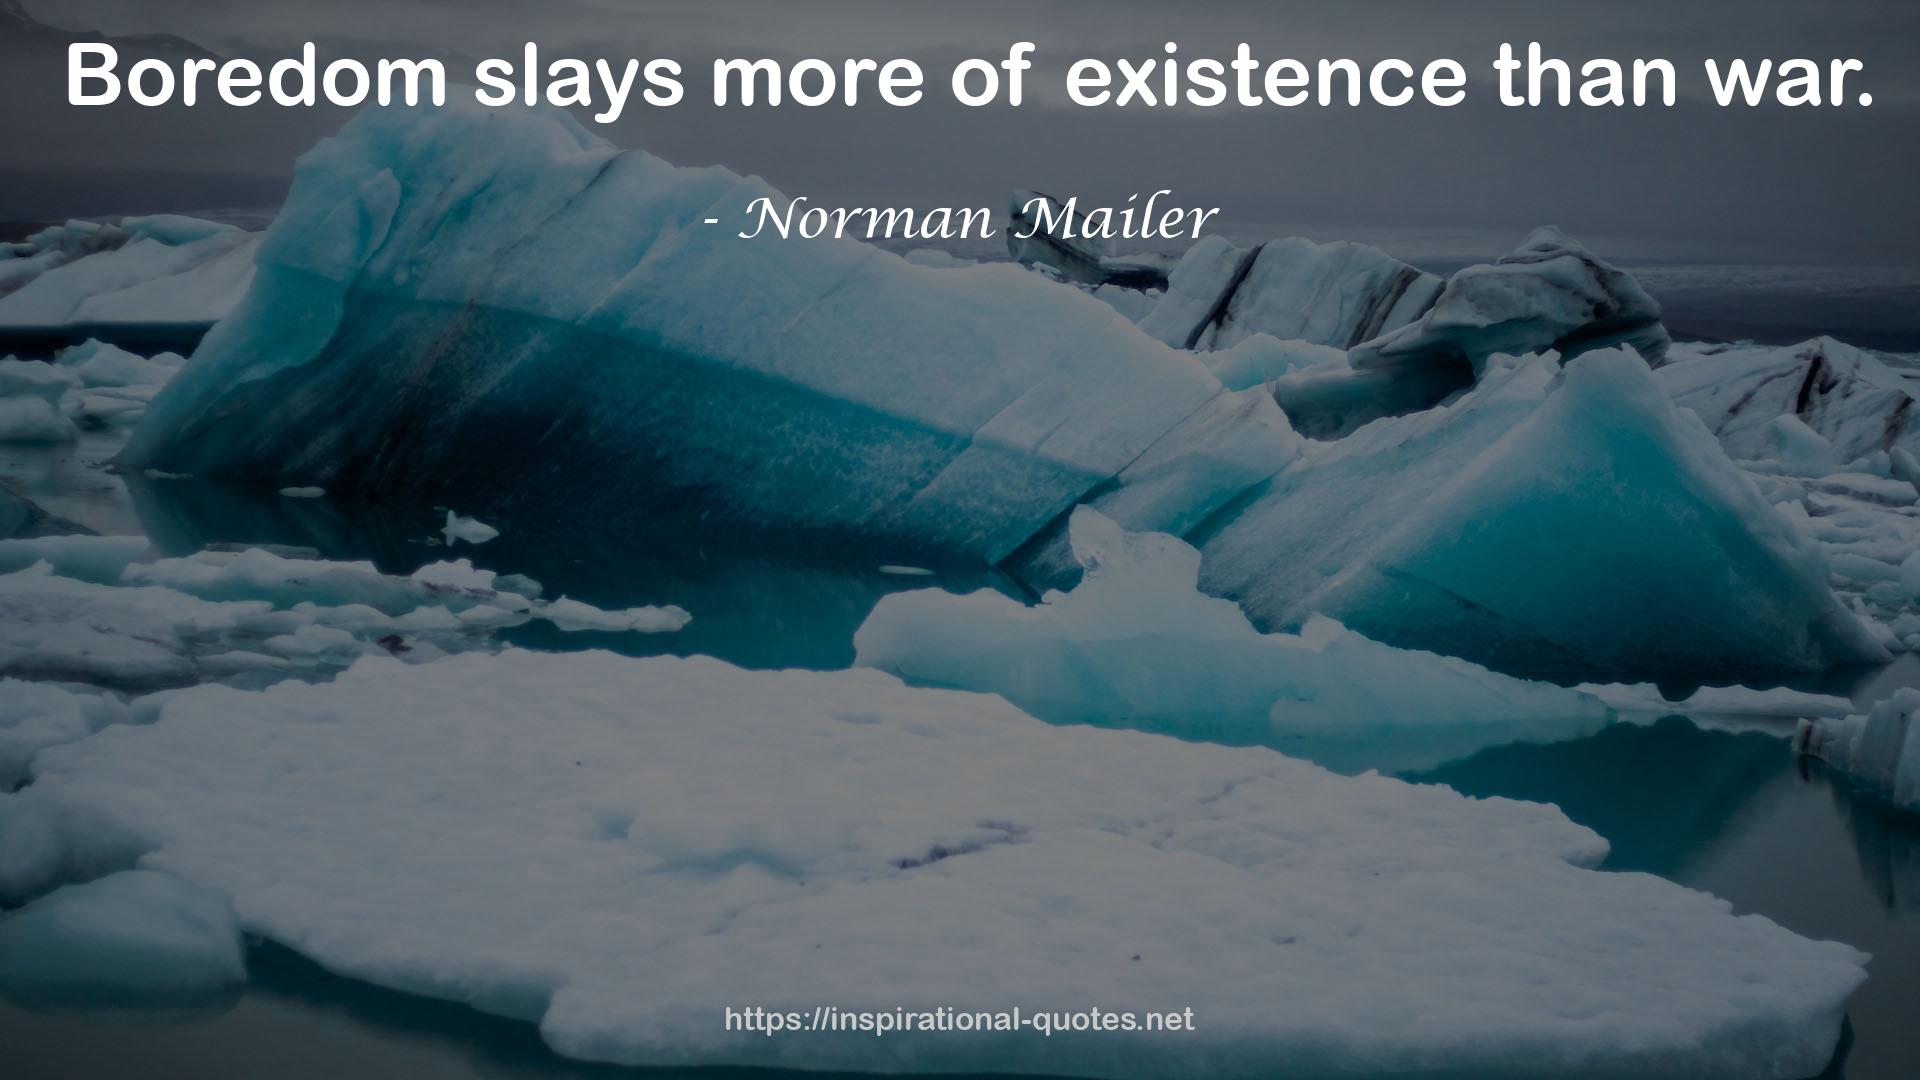 Norman Mailer QUOTES